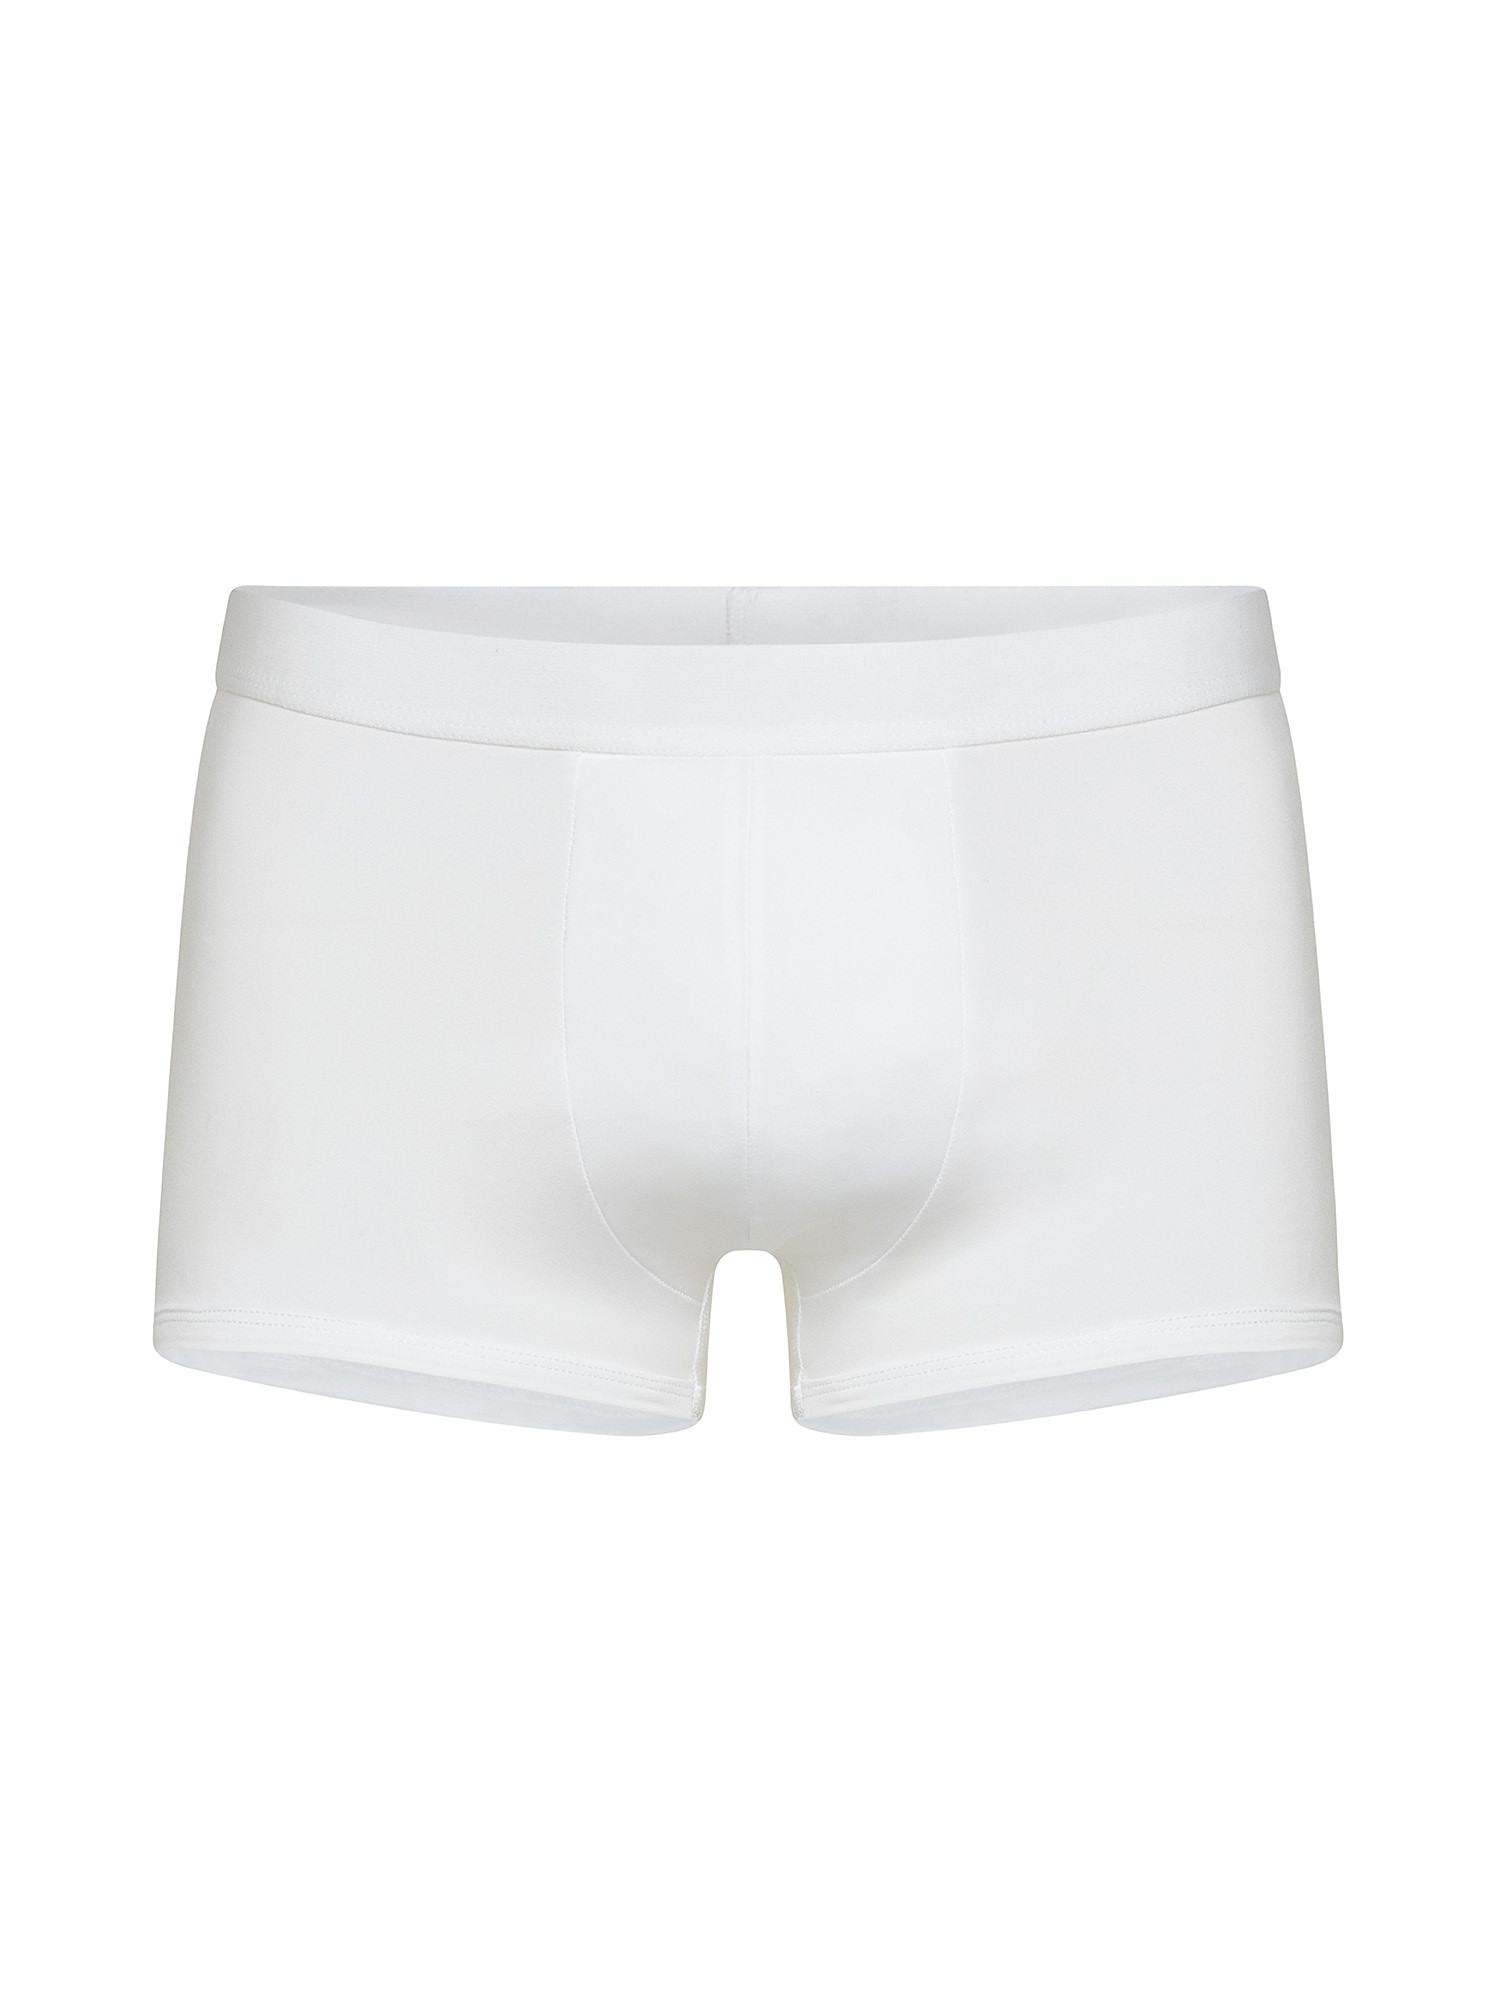 Solid color microfiber boxer, White, large image number 0